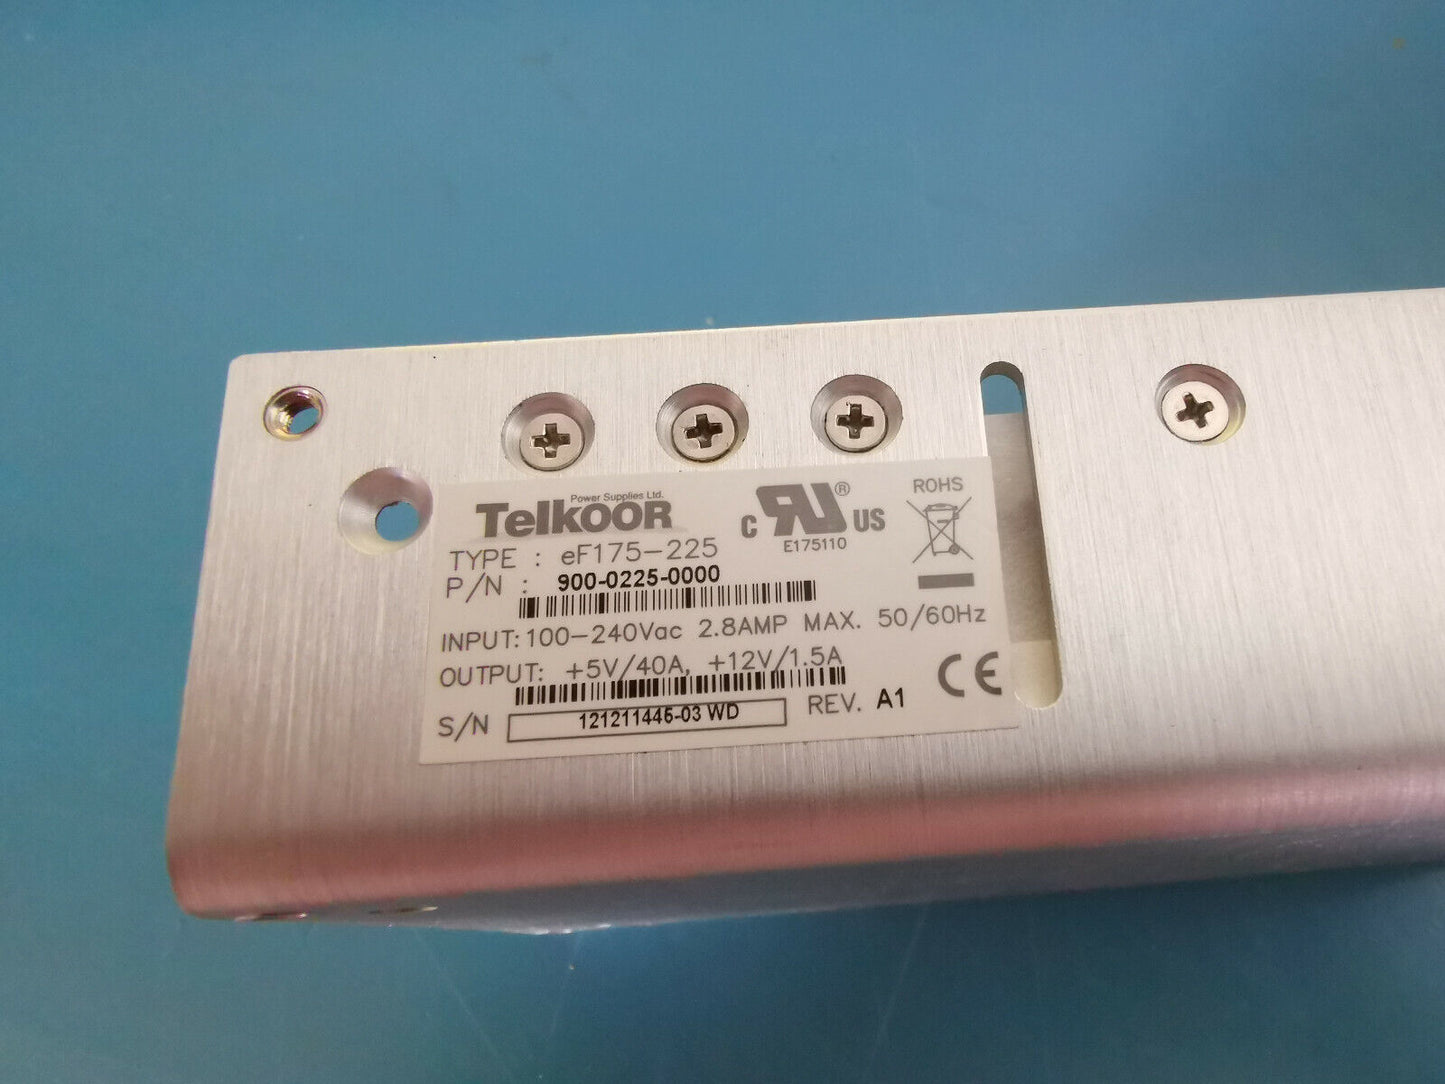 5v 40A Power Supply 200W Switch Mode Power Supply Telkoor EF175-225